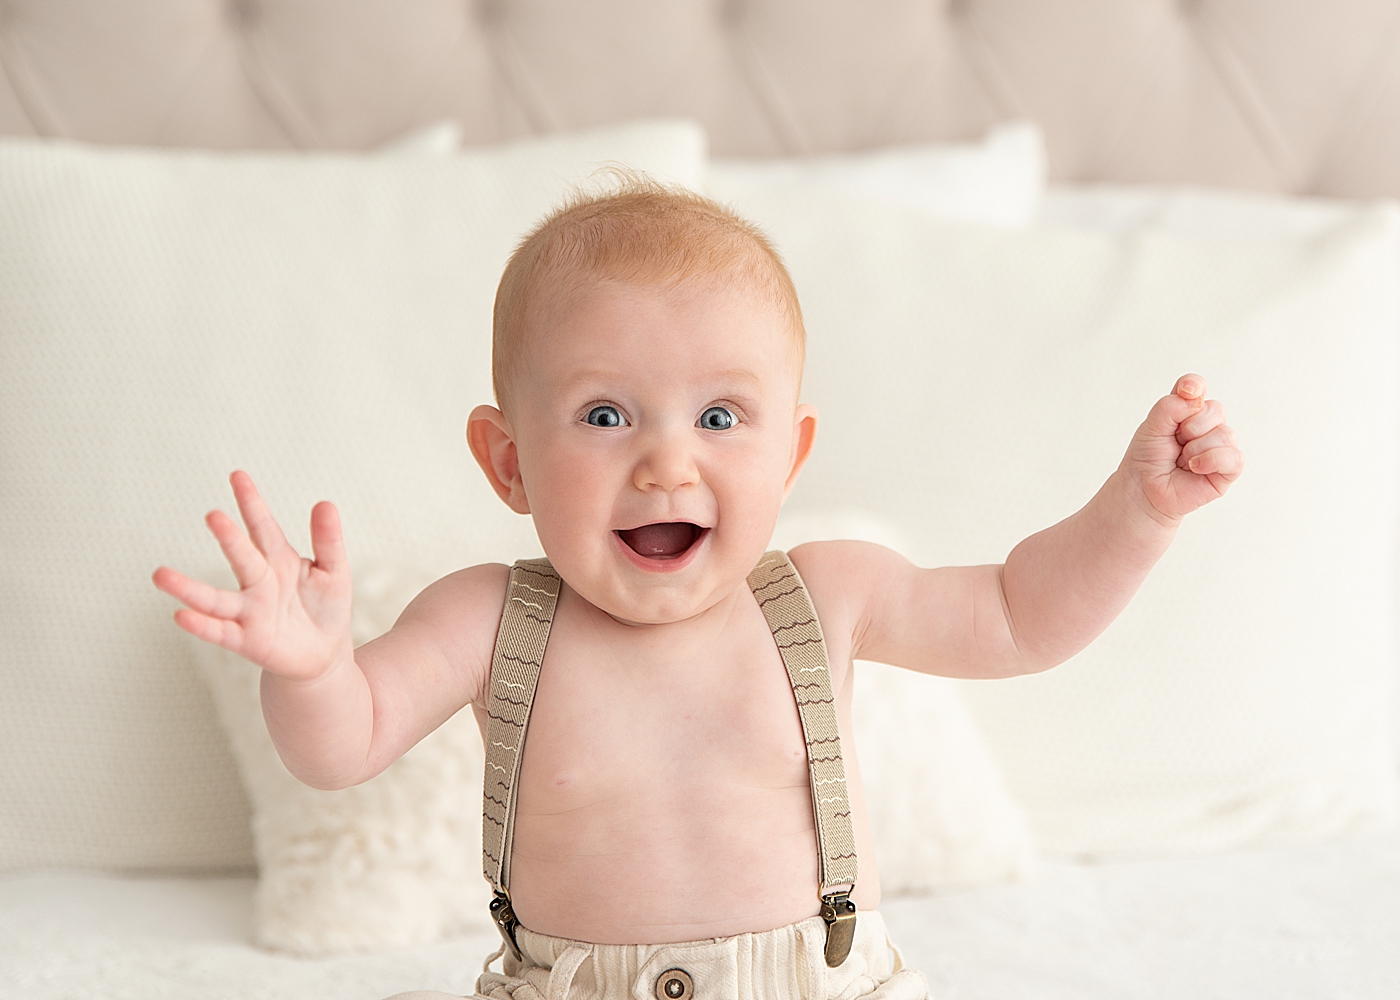 Six month old little boy wearing suspenders and has the biggest smile on his face. Photo by Rachel Brookes Photography.